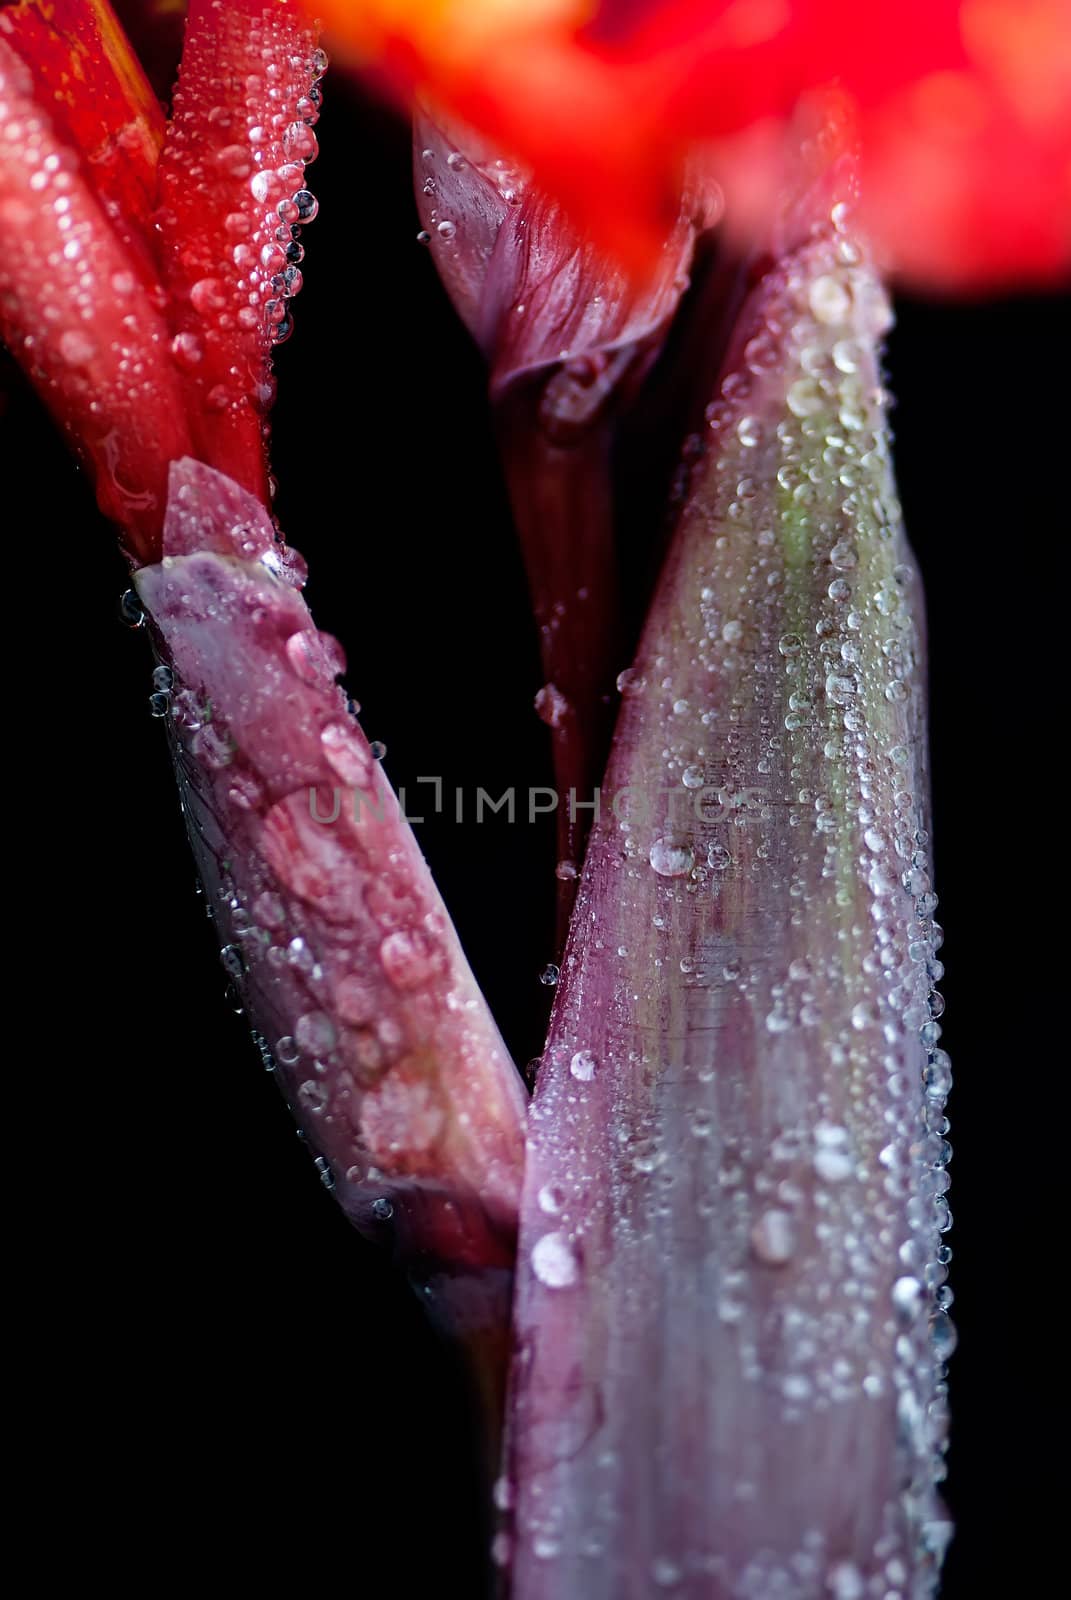 The Canna after the rain by xfdly5